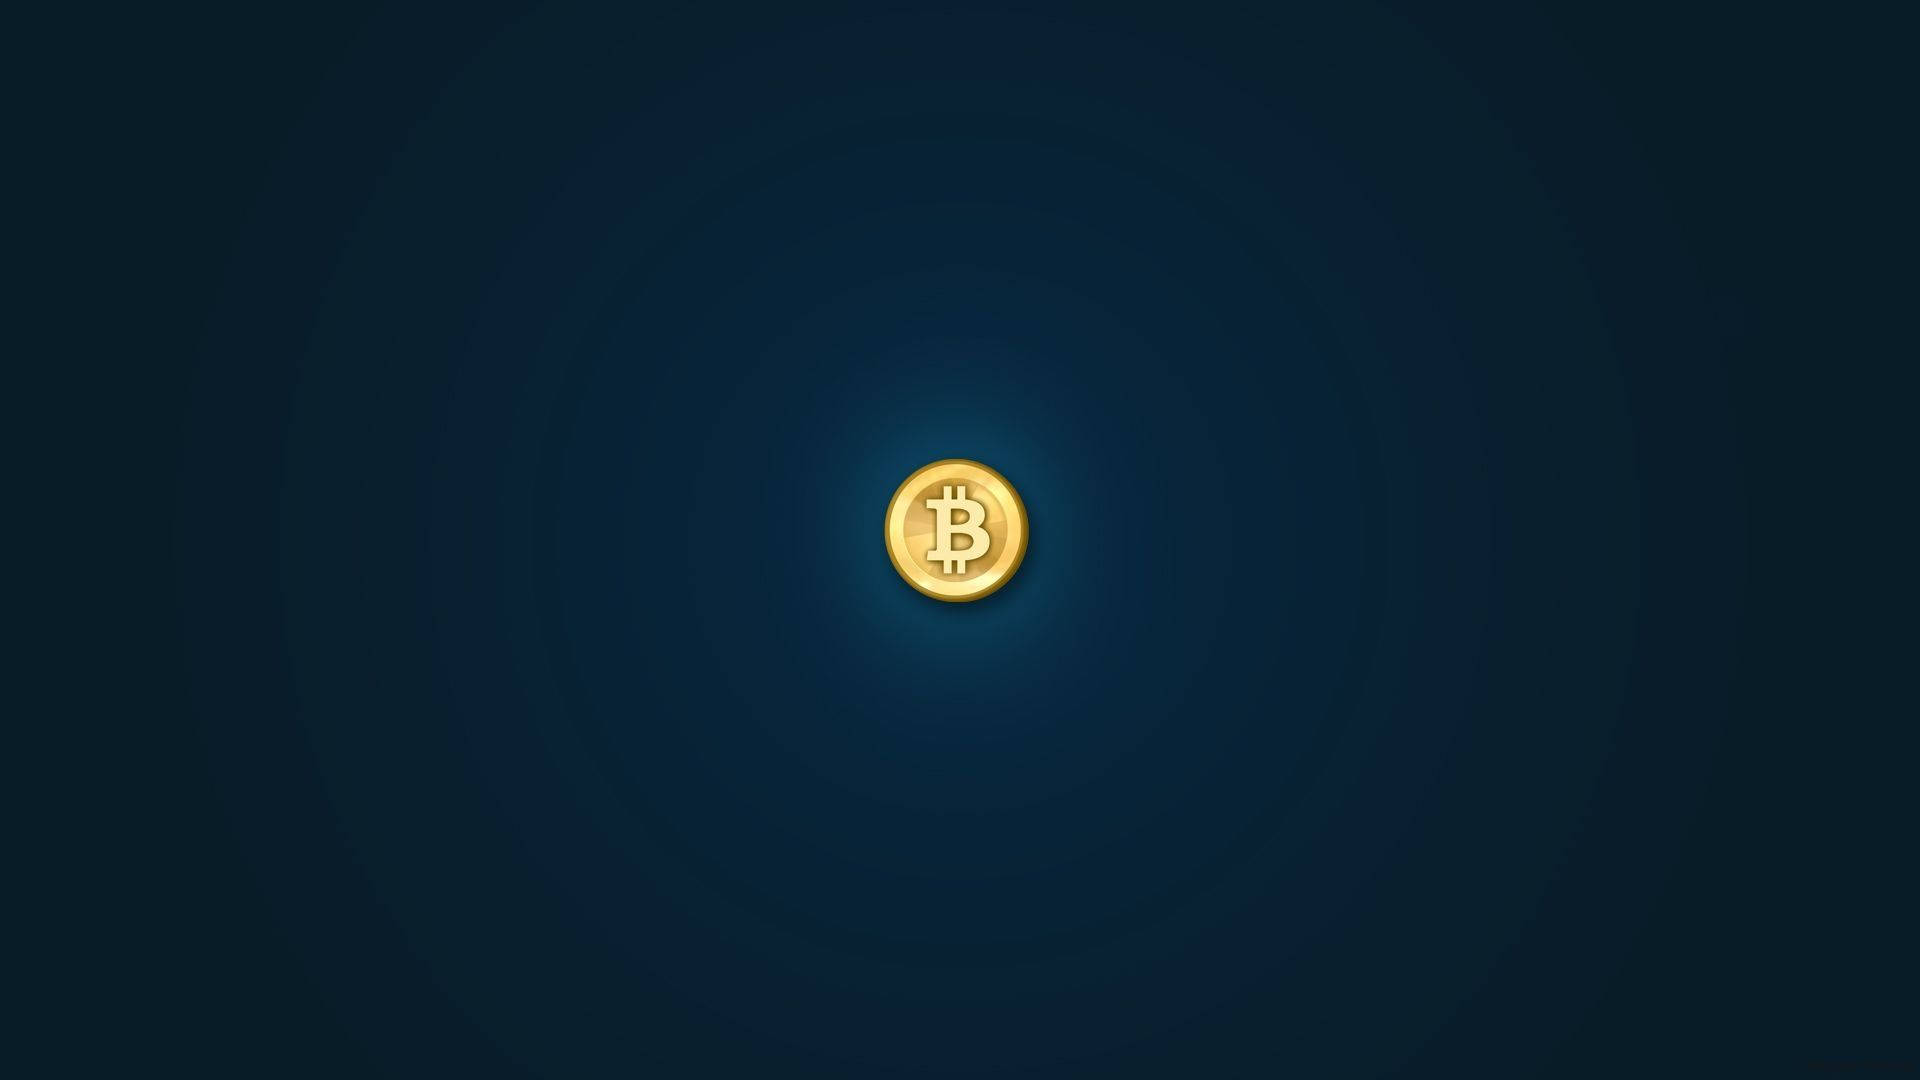 The future of money is here: Bitcoin. Wallpaper